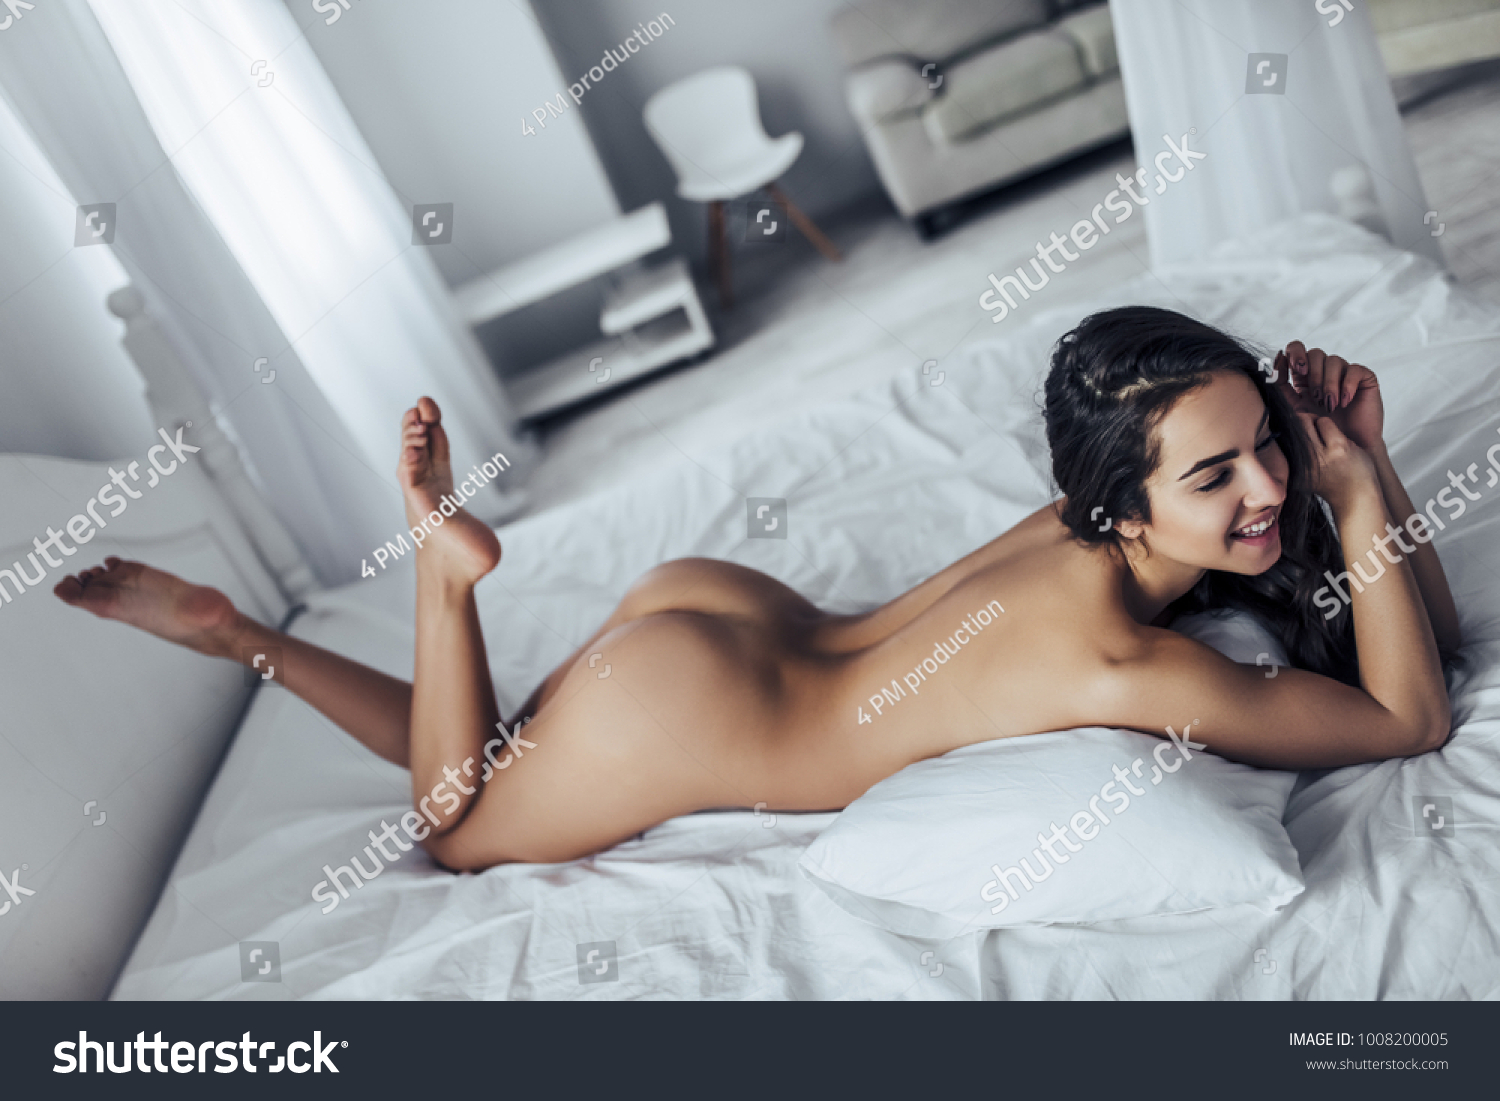 Sexy Young Naked Woman Lying White Stock Photo 1008200005 Shutterstock